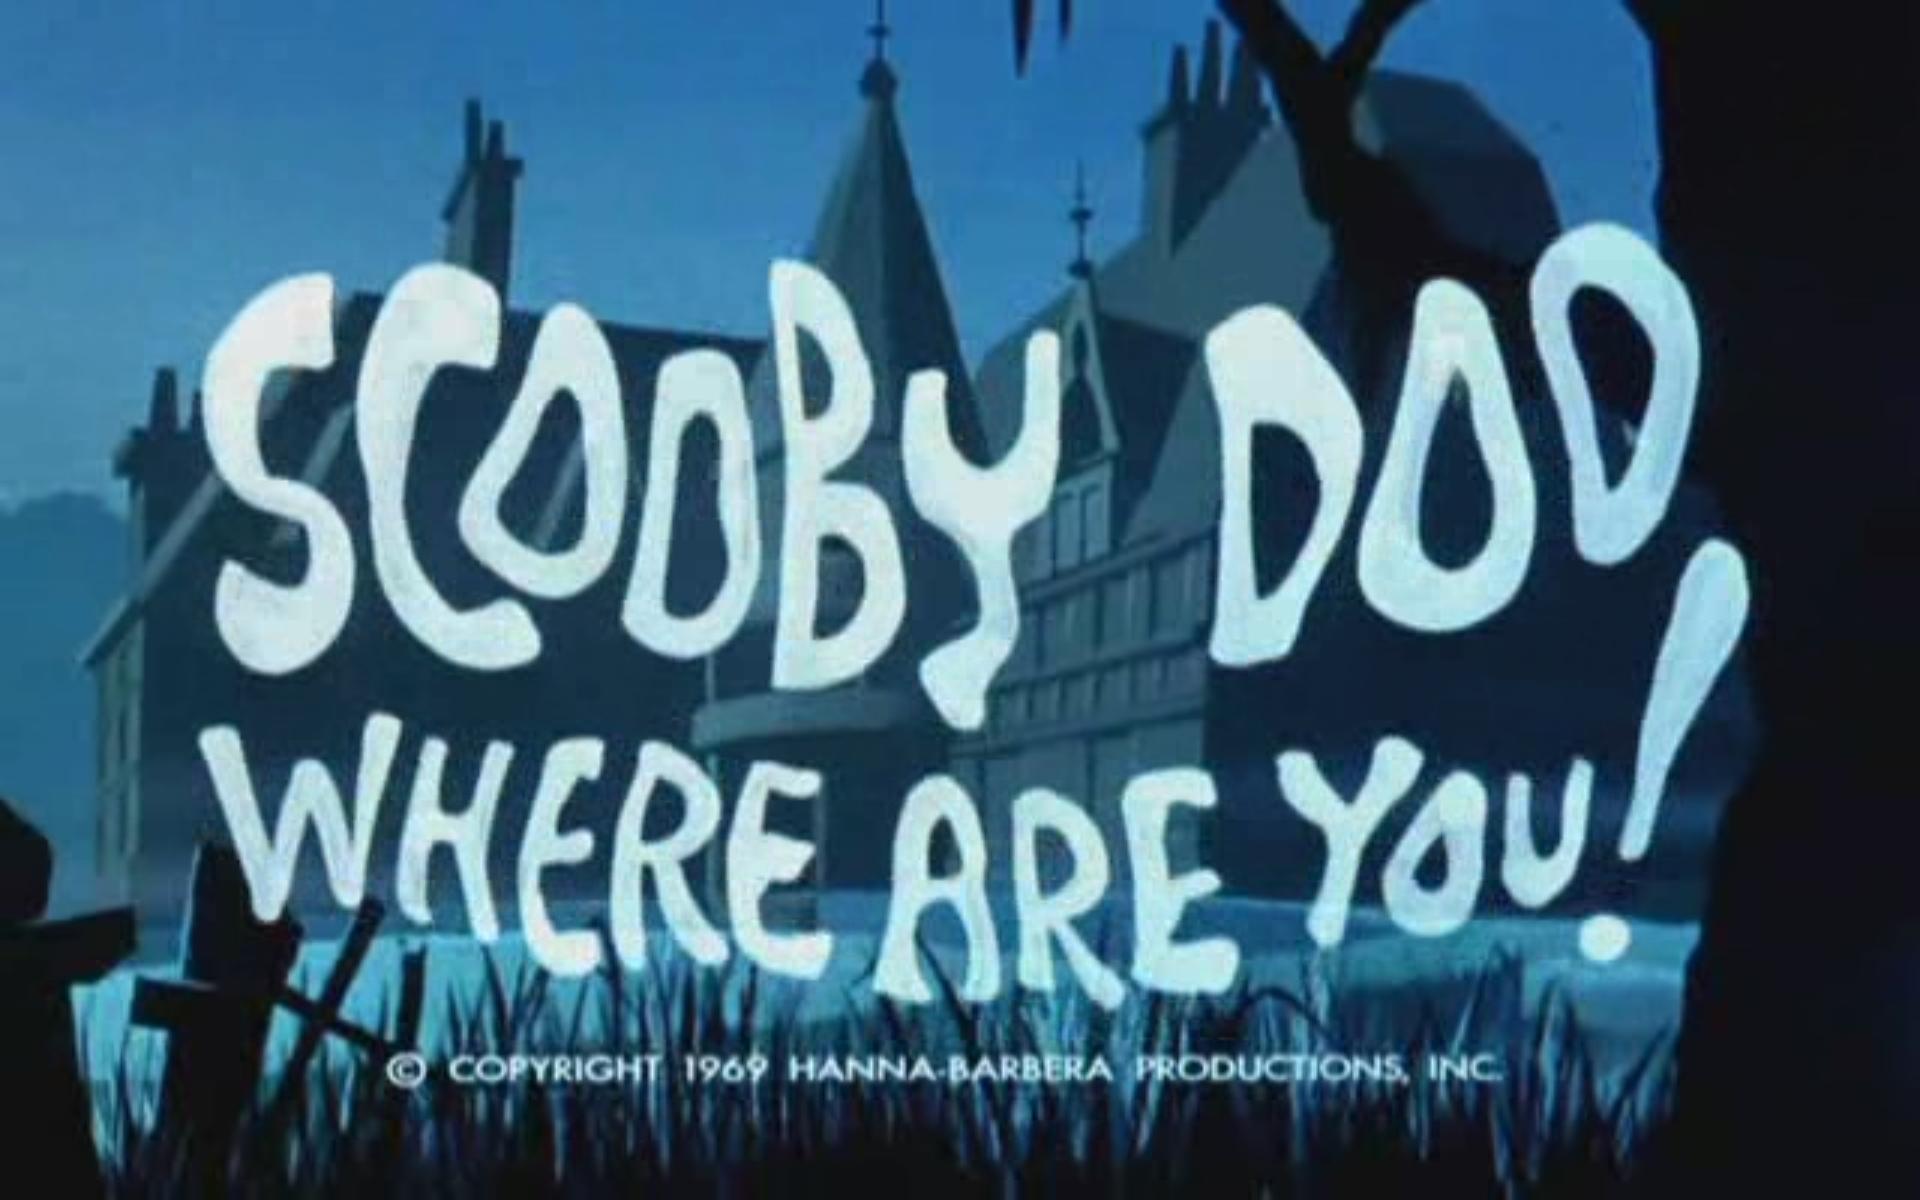 Scooby Doo, Where Are You! Theme Song. Movie Theme Songs & TV